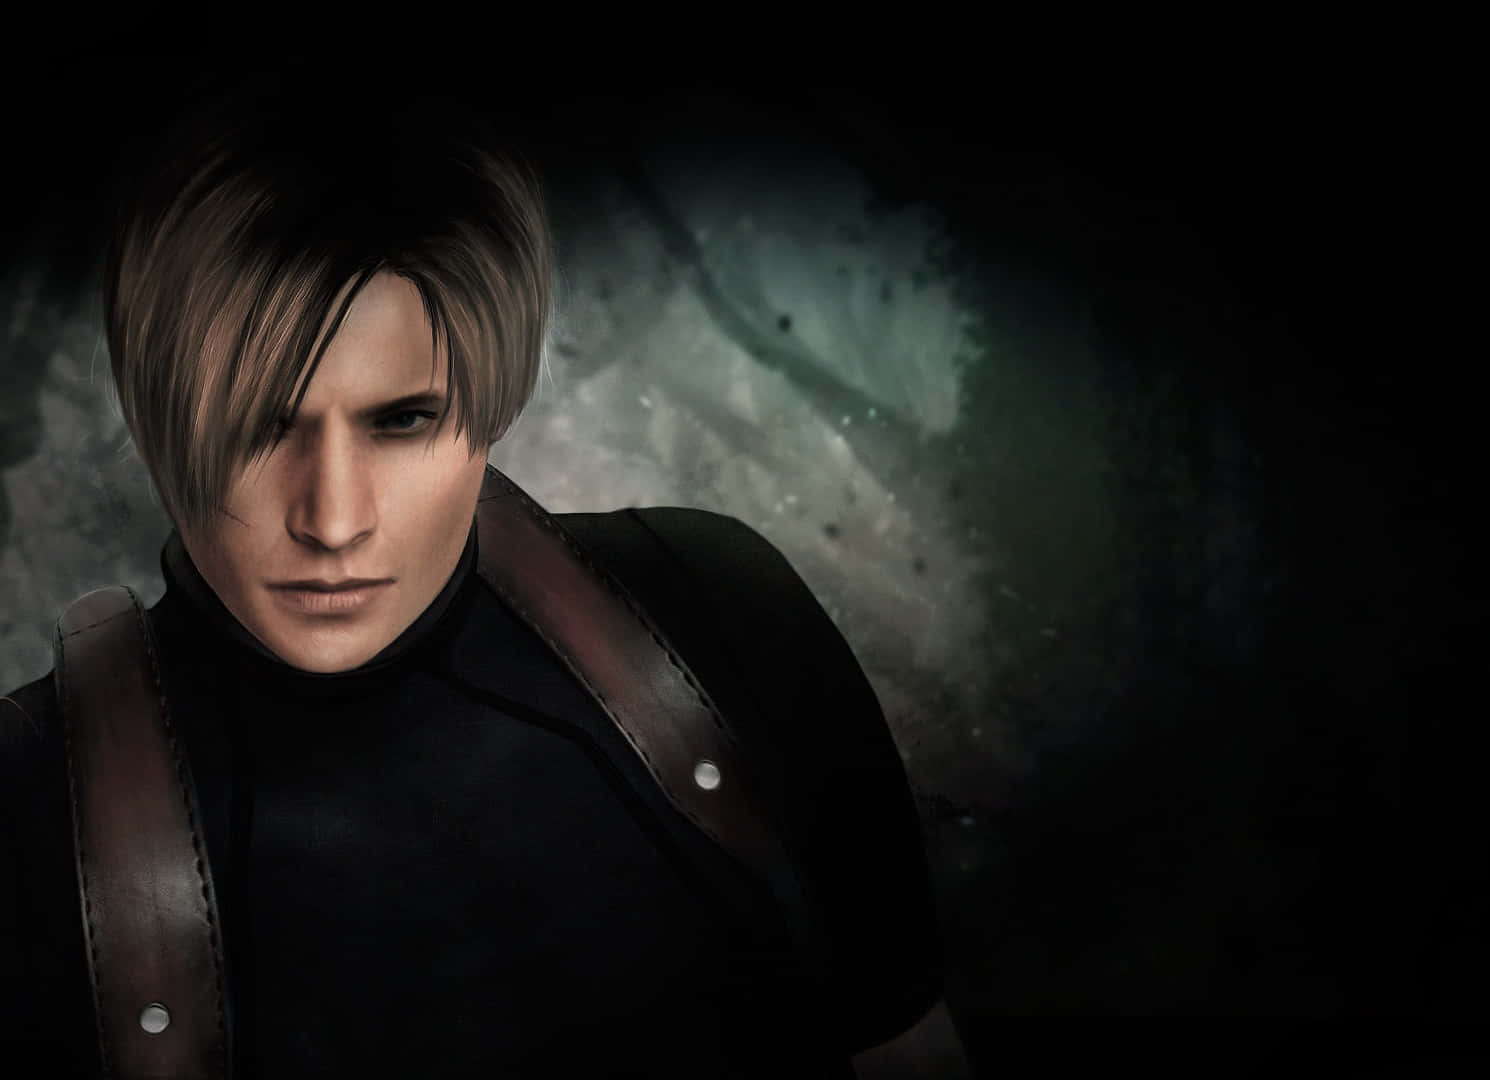 Leon S. Kennedy Bravely Facing The Unknown. Wallpaper